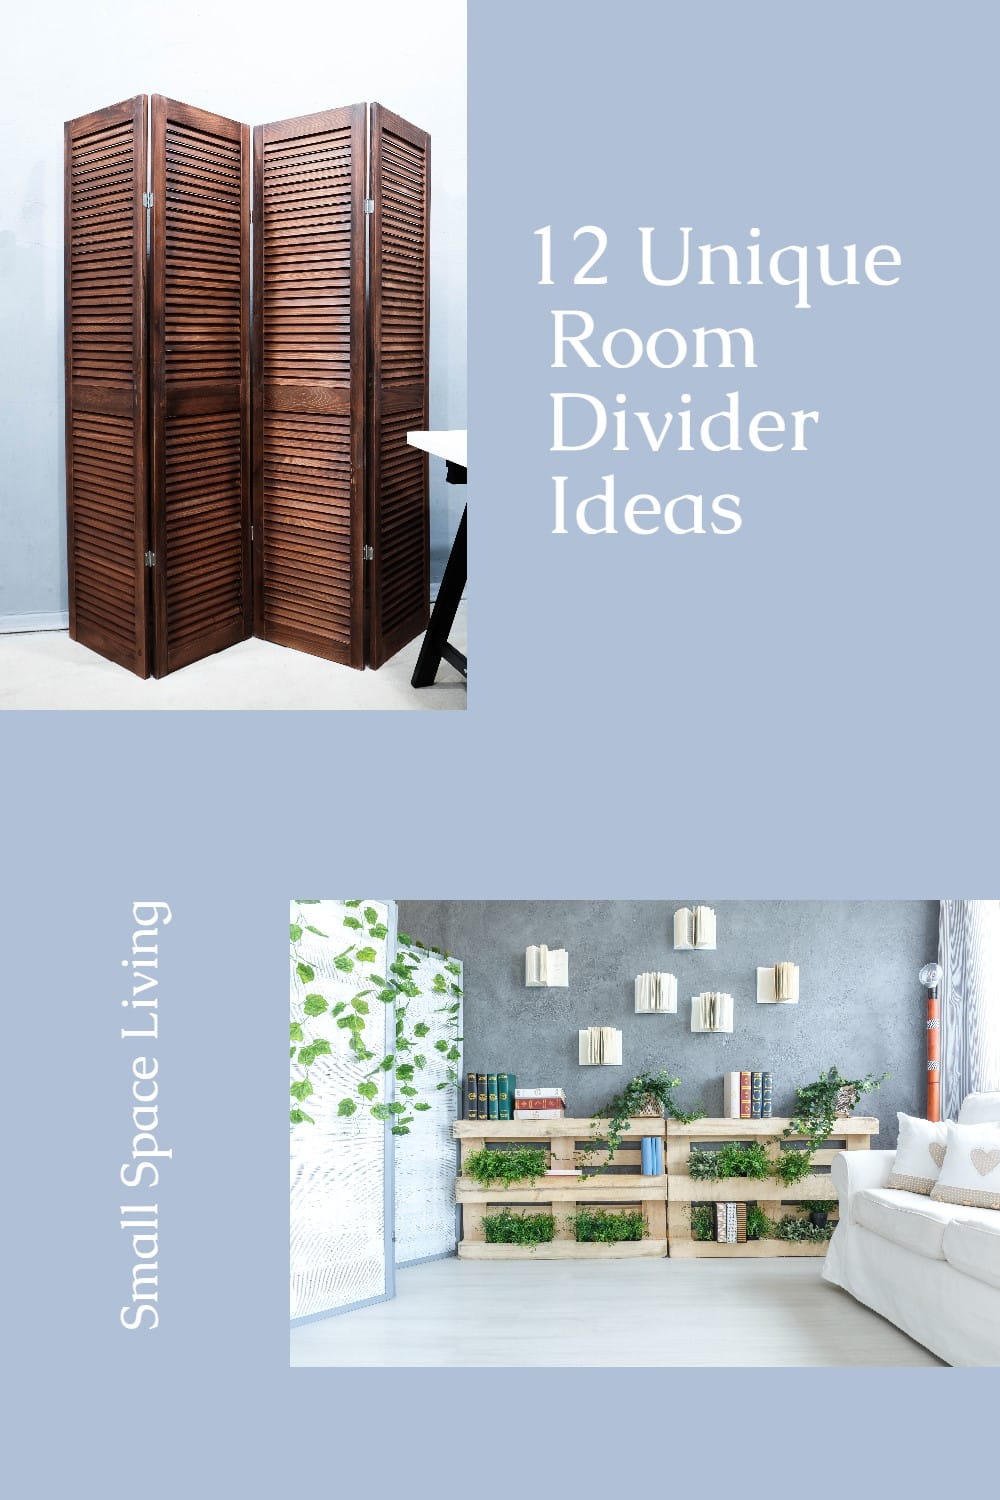 If you're having small space privacy issues, or trying to break up an open floor plan, these 12 room divider options will solve your problem. via @repurposedlife